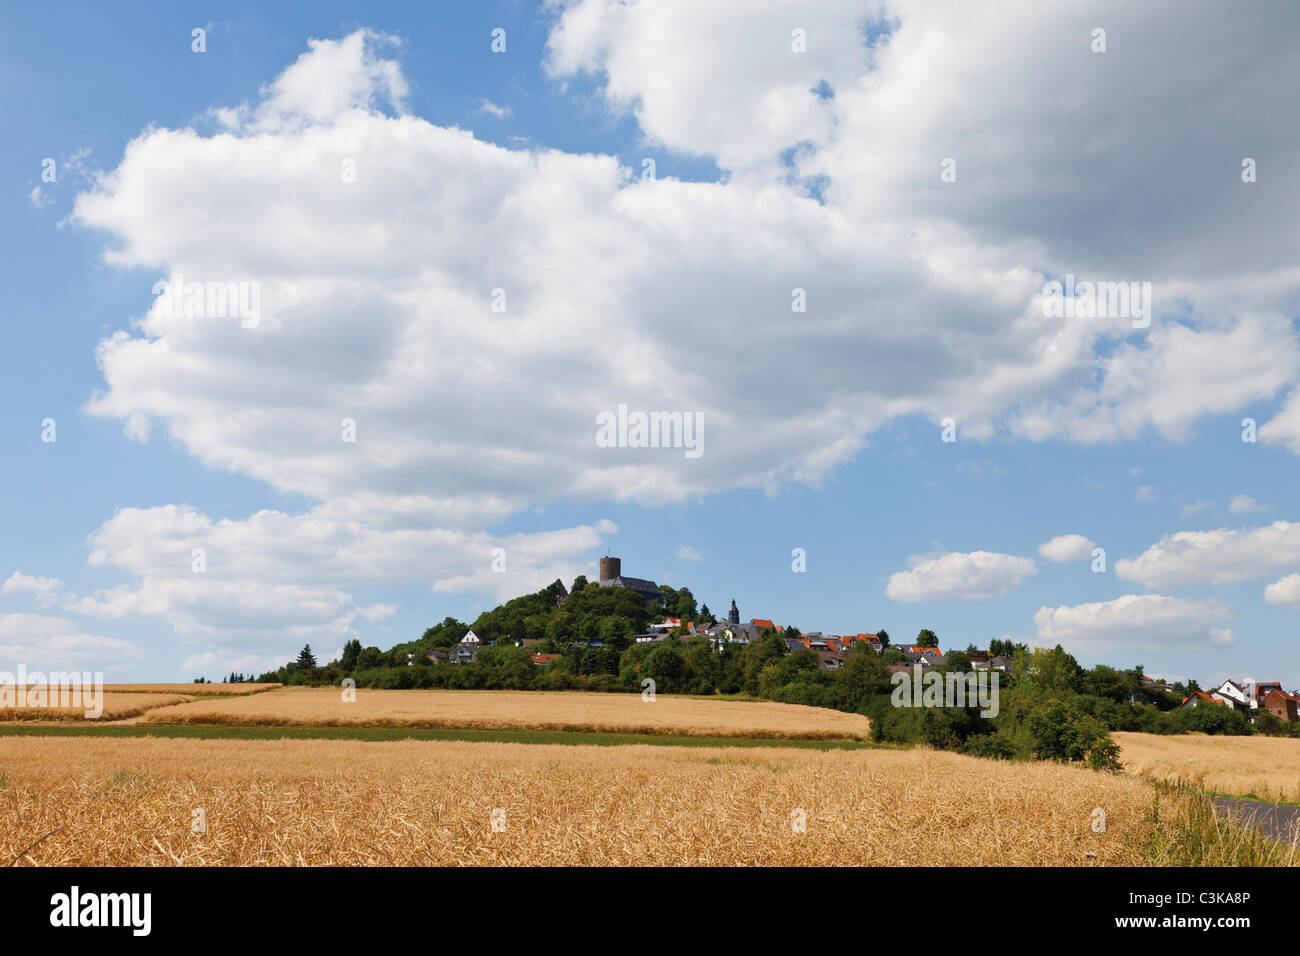 Europe, Germany, Hesse, Giessen, View of medieval castle near town Stock Photo